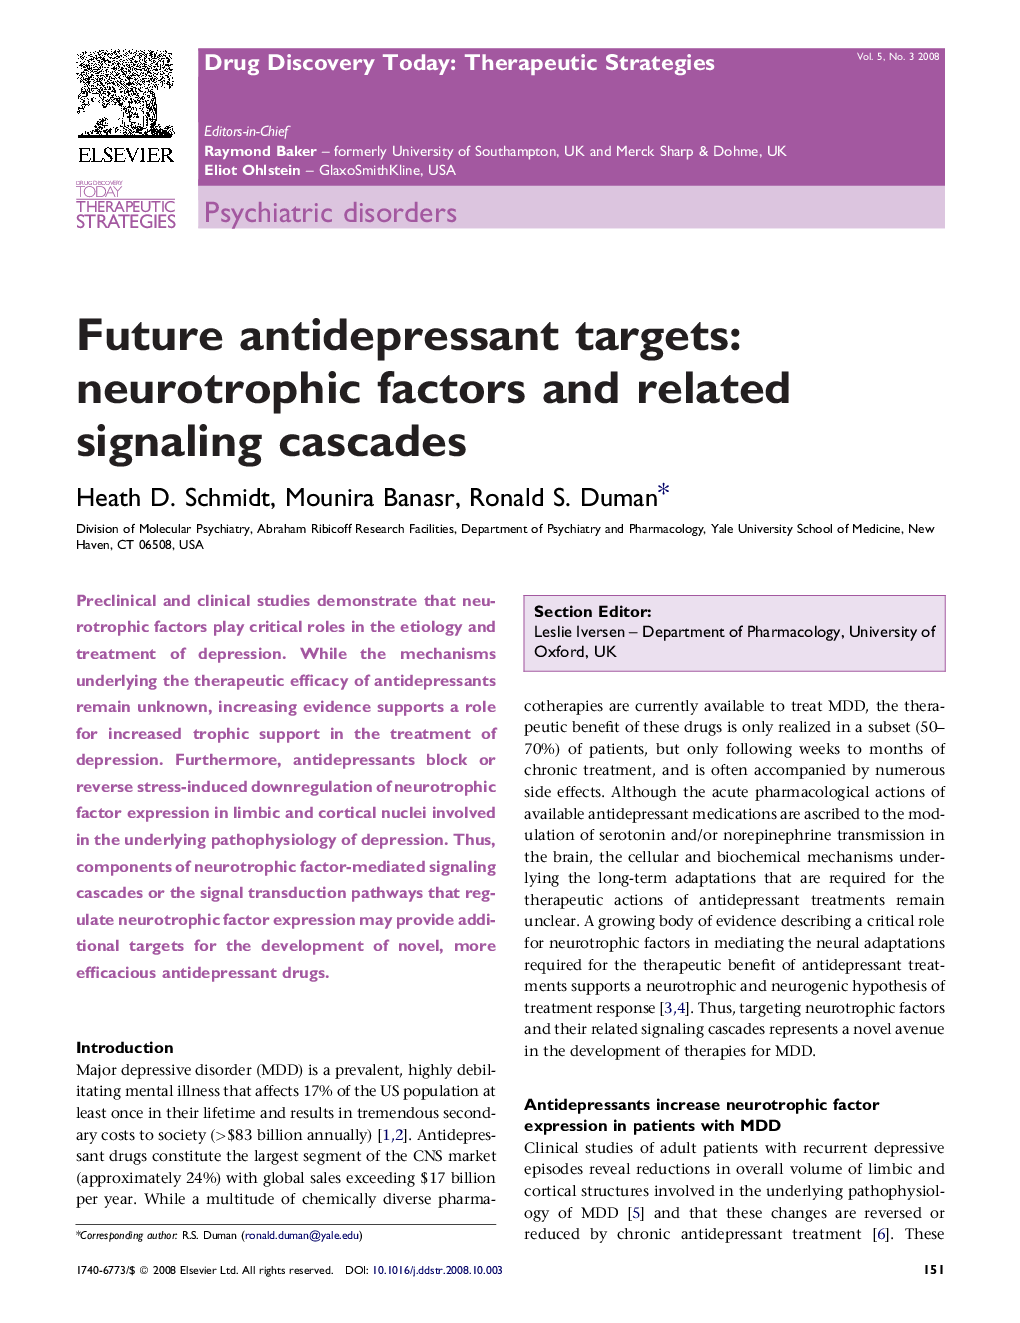 Future antidepressant targets: neurotrophic factors and related signaling cascades